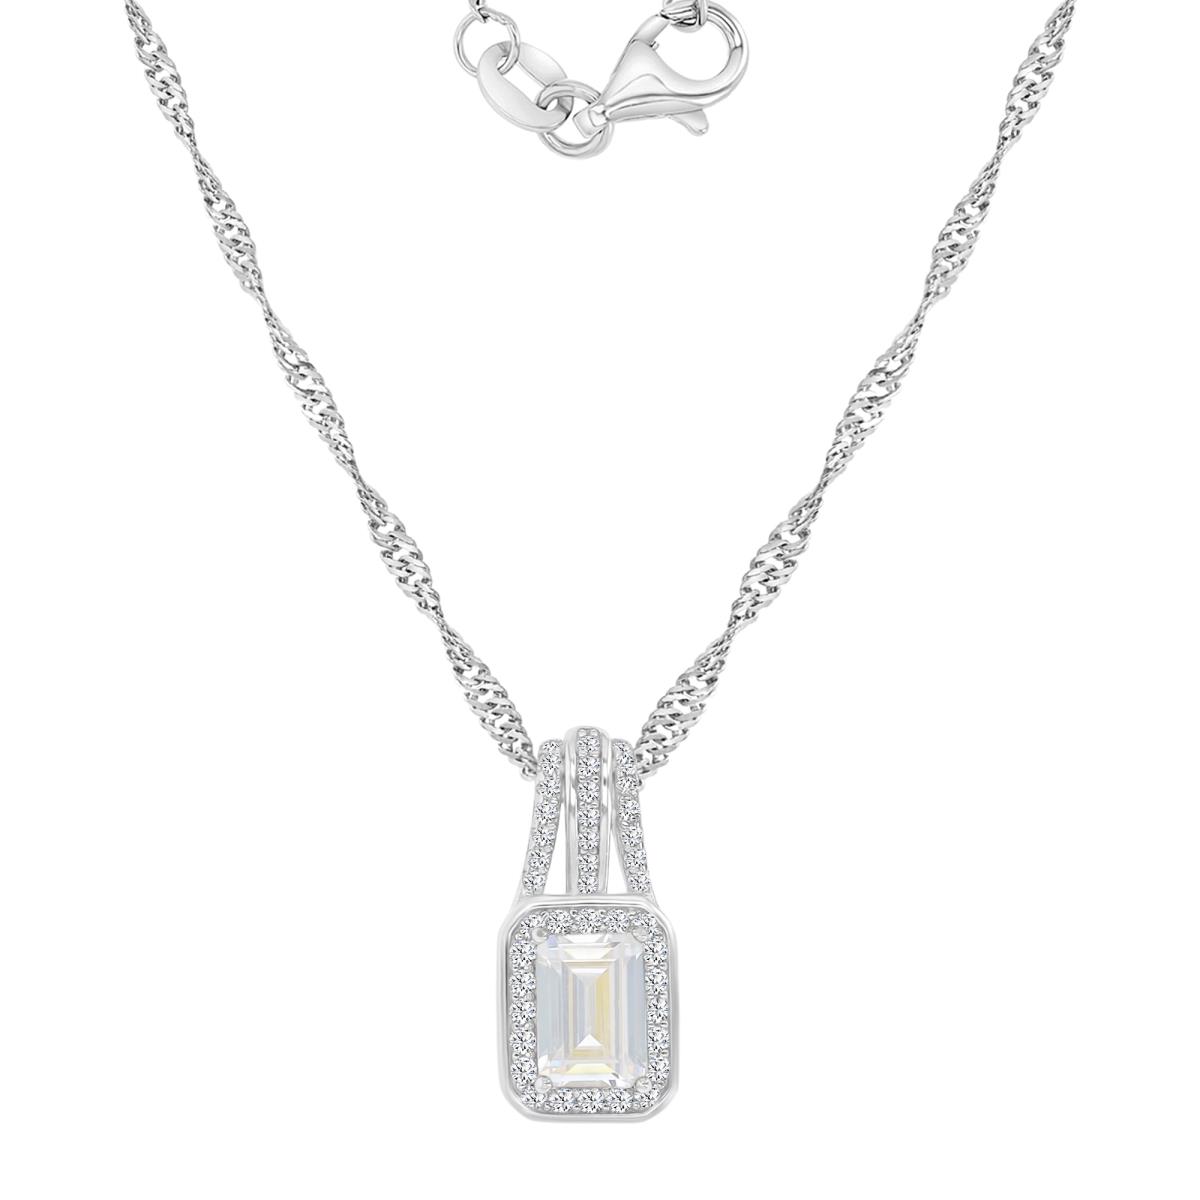 Sterling Silver Rhodium 18X8.3MM Polished White CZ Emerald Cut Dangling Pendant Singapore Chain 18+2" Necklace